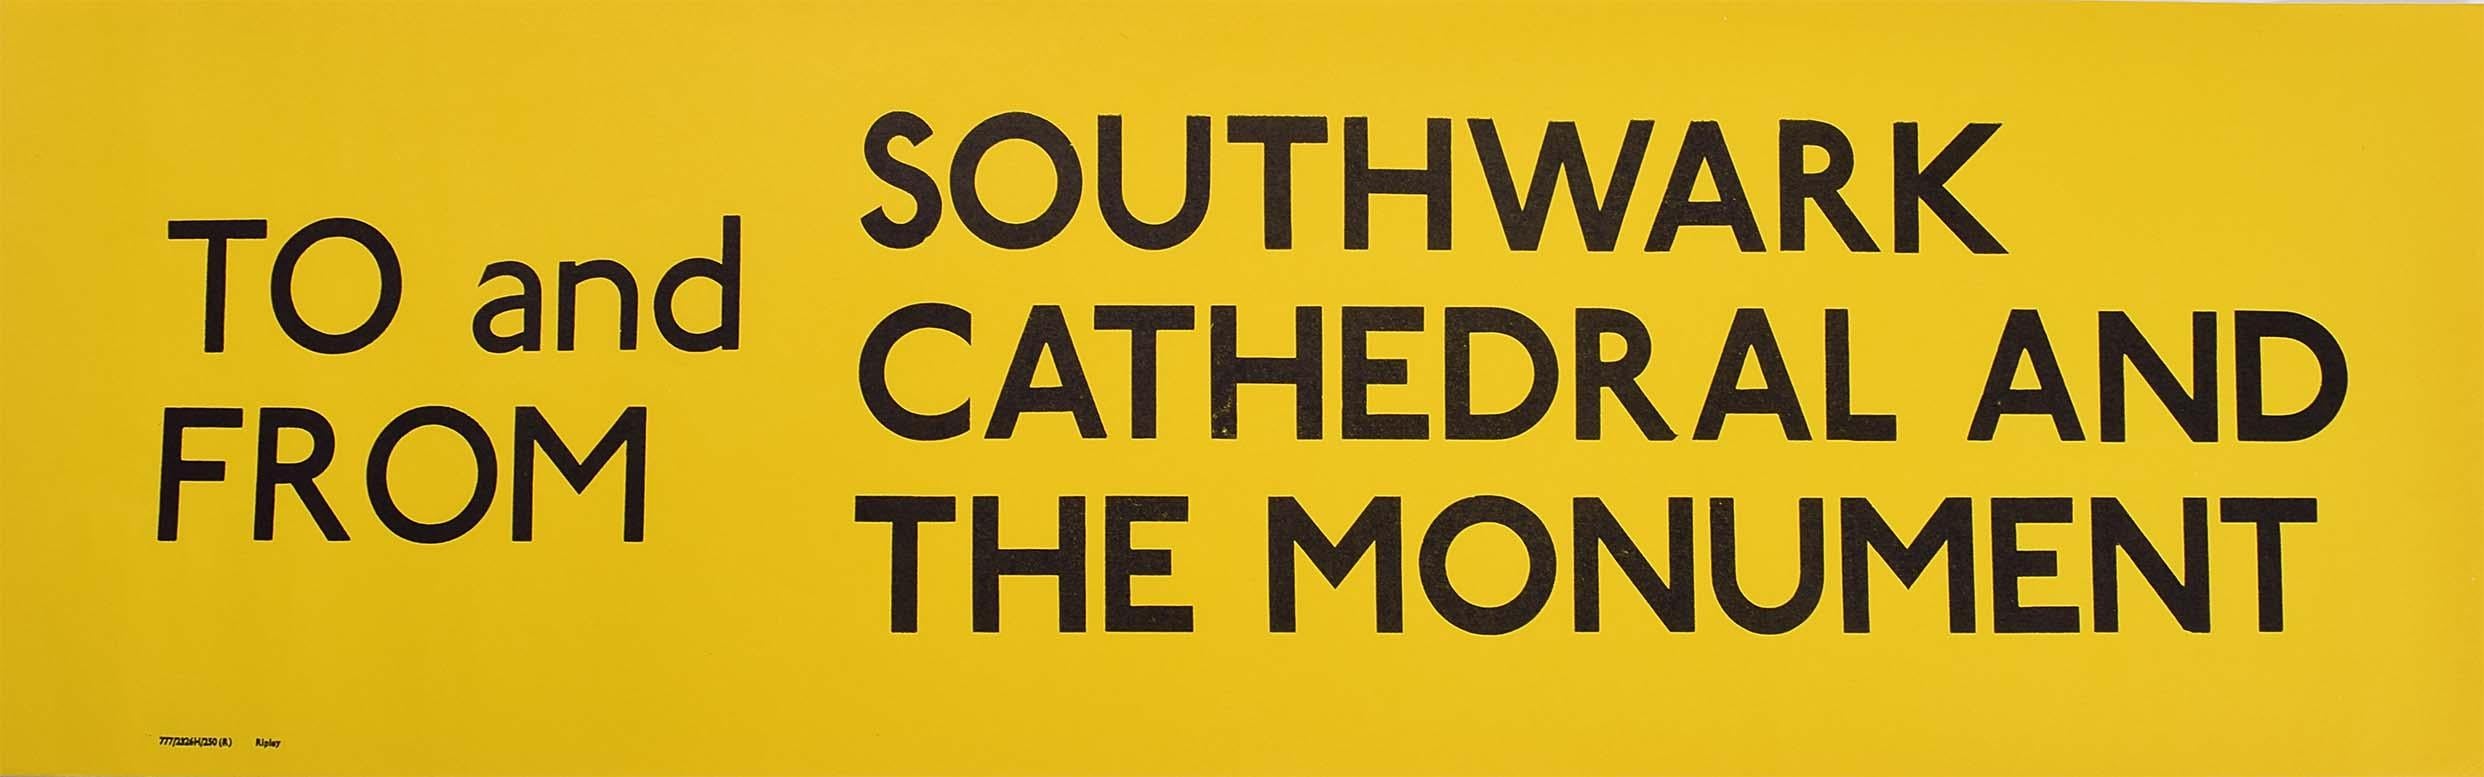 Southwark Cathedral and the Monument London England Routemaster Bus sign c. 1970